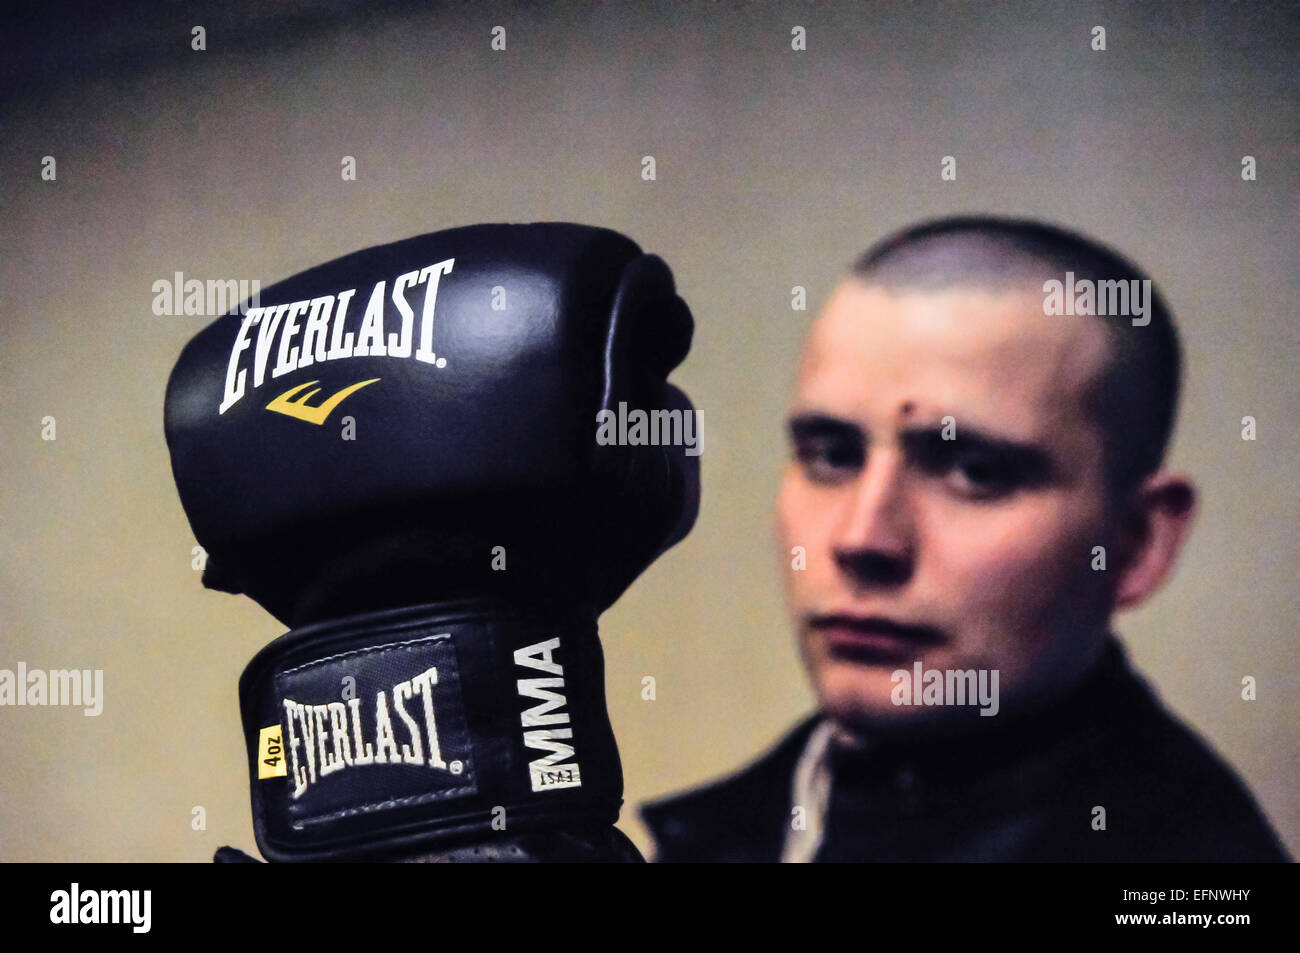 MMA fighter holds up his Everlast glove prior to a fight Stock Photo - Alamy